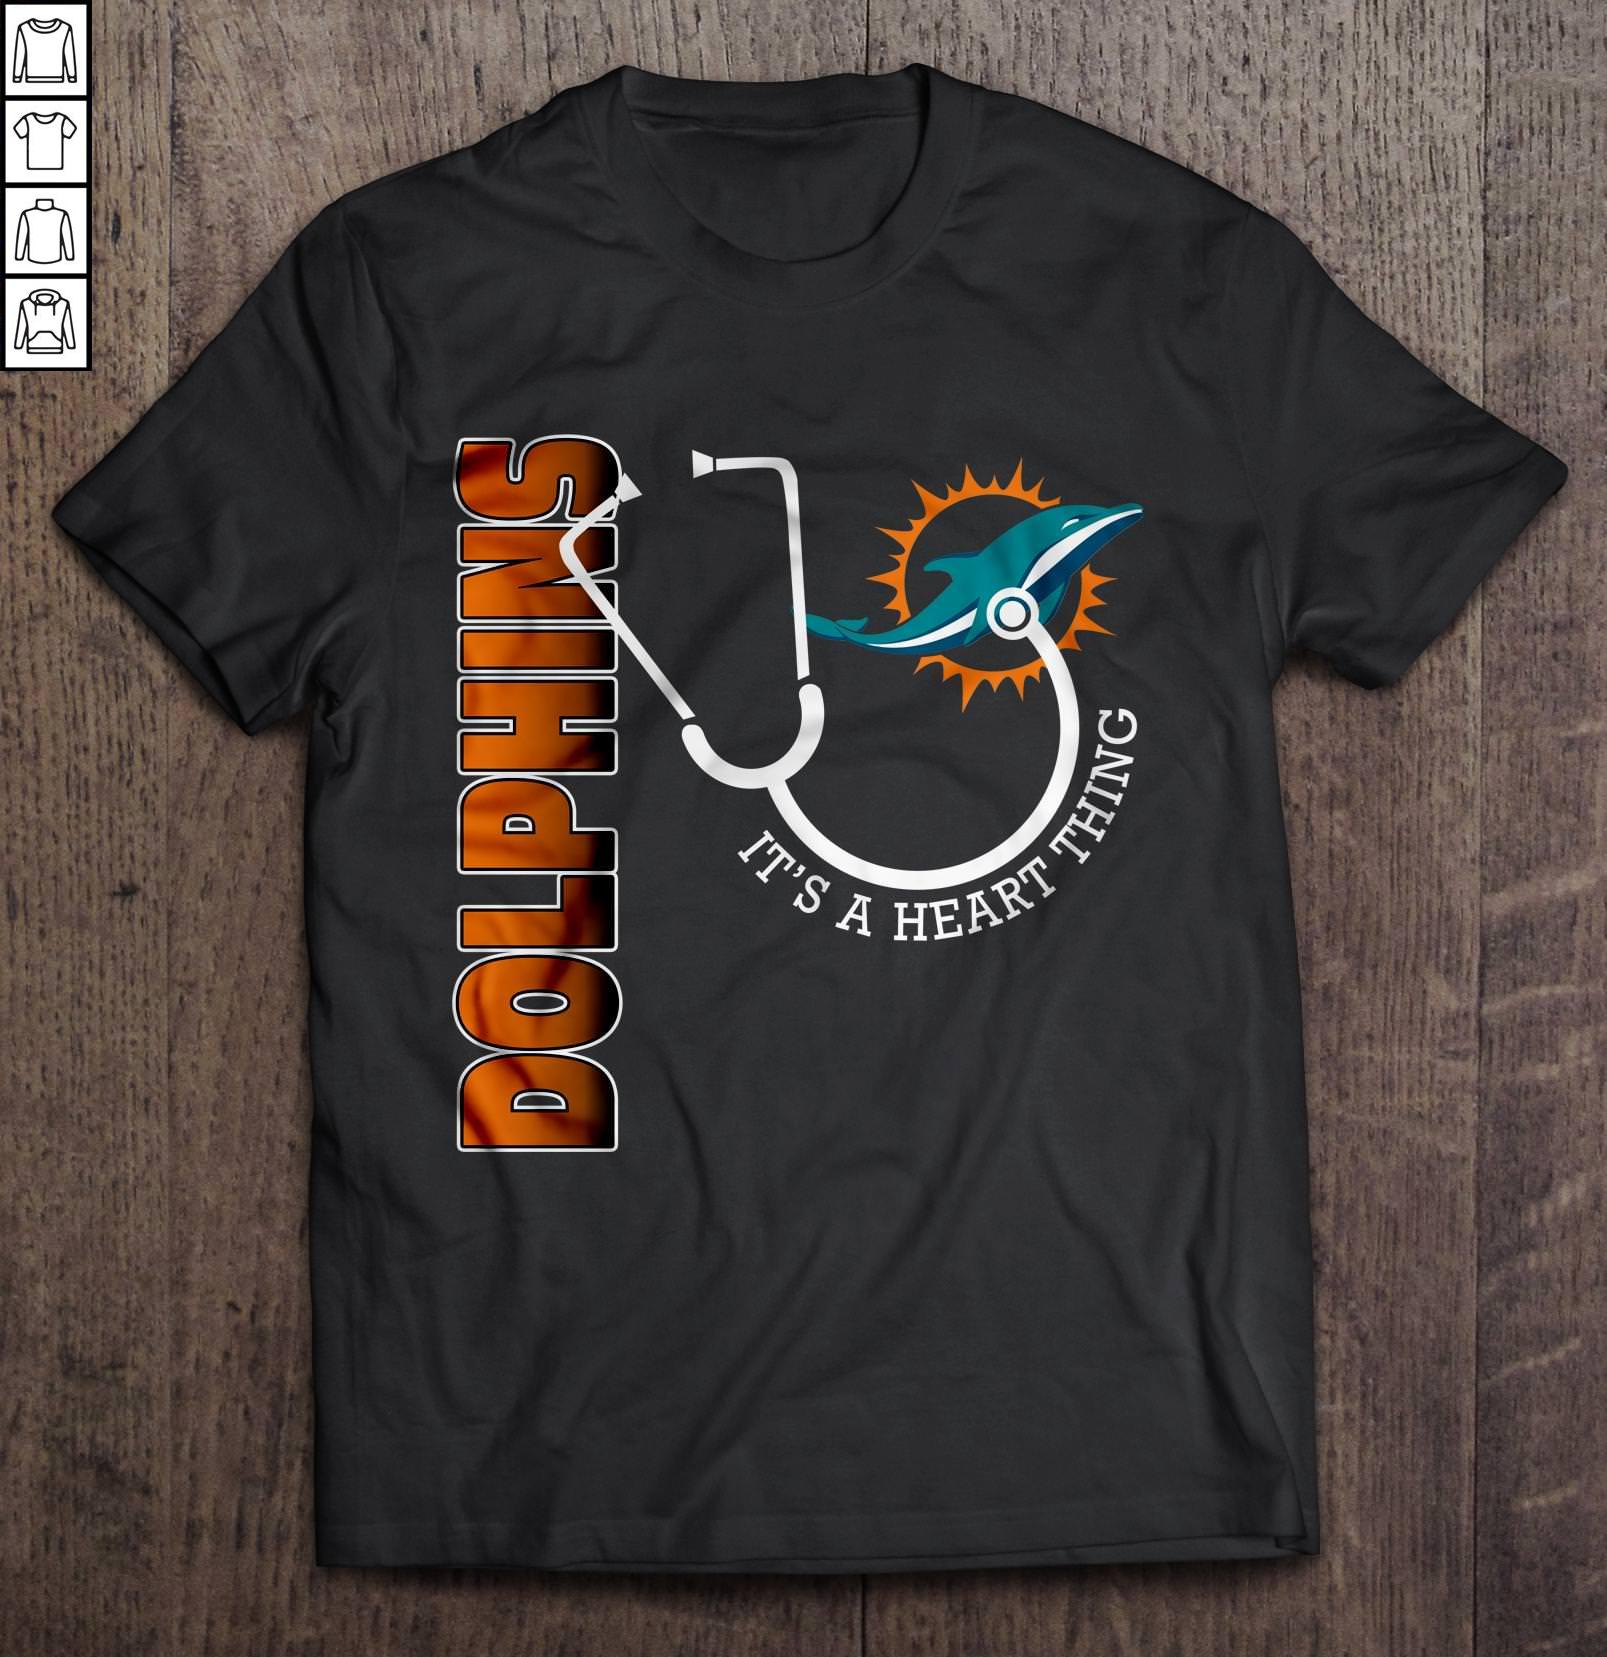 Miami Dolphins Shop - Miami Dolphins It's A Heart Thing Stethoscope NFL TShirt 1